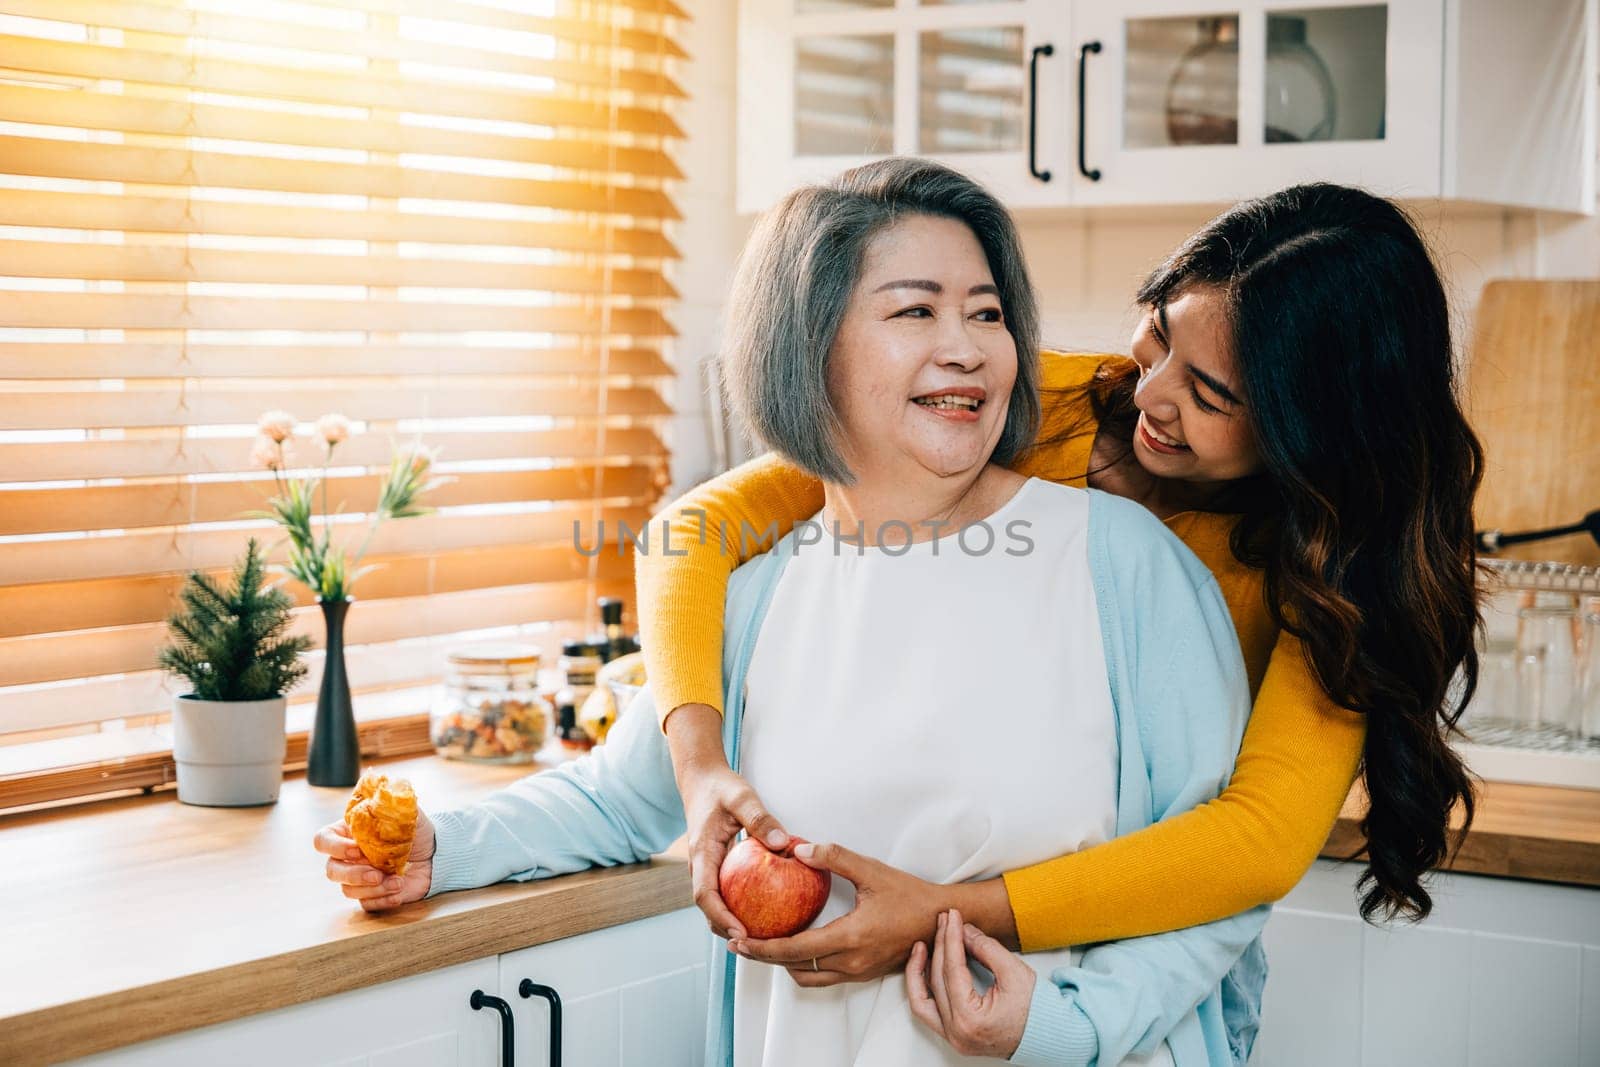 A smiling old woman stands in the kitchen, her adult daughter, a cheerful young woman in an apron, holds an apple. Their bond exemplifies the joy of teaching, learning, and family togetherness. by Sorapop